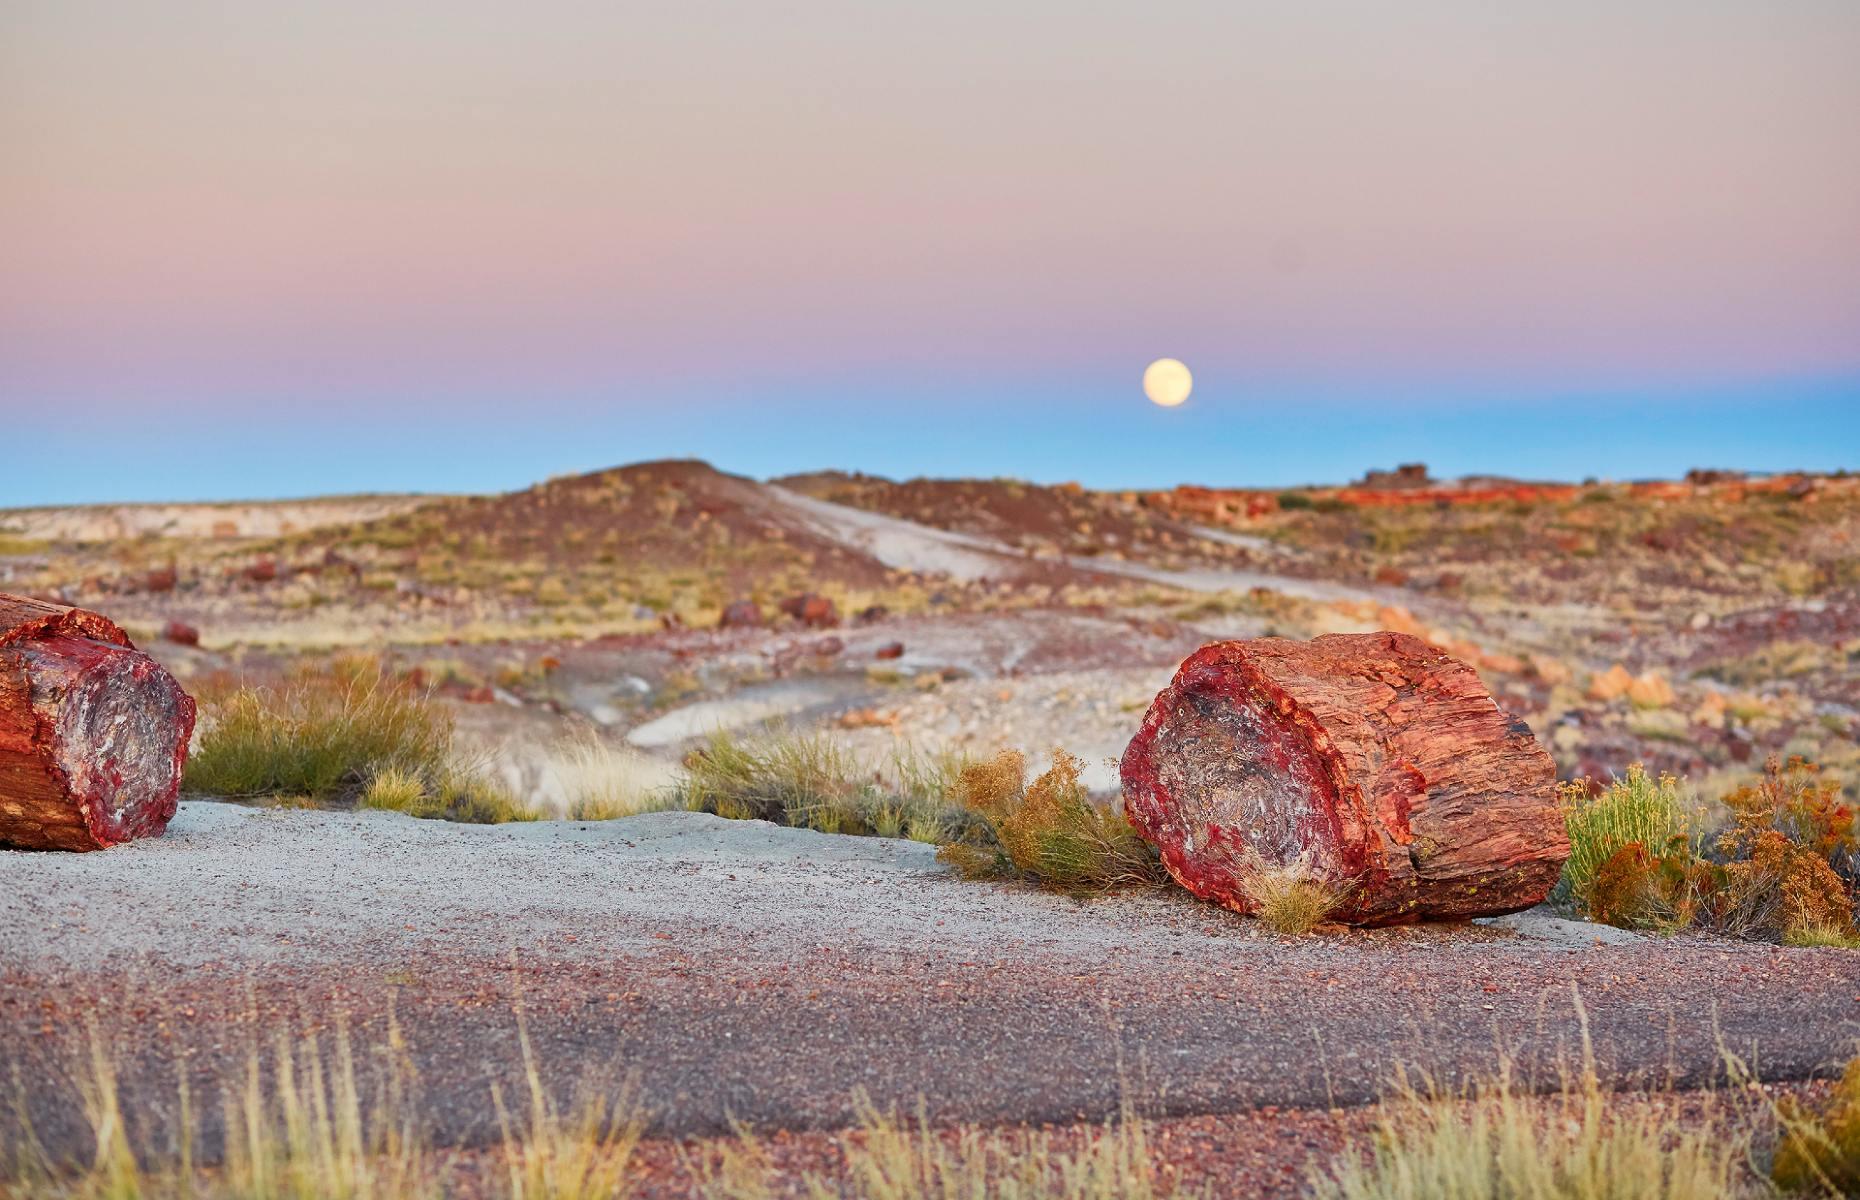 <p>Filled with a kaleidoscopic array of natural colors, the Petrified Forest looks almost too pretty to be real. The National Park, which stretches across miles of Interstate 40 in the north of the state, is best known for two incredible natural features. In the north, you’ll find the Painted Desert, a series of striped, multicolored hills formed over the course of millions of years, while in the south you’ll find the famous petrified trees, a collection of stunning fossilized logs filled with quartz crystals. Needless to say, you’ll want to spend plenty of time exploring the many trails here. </p>